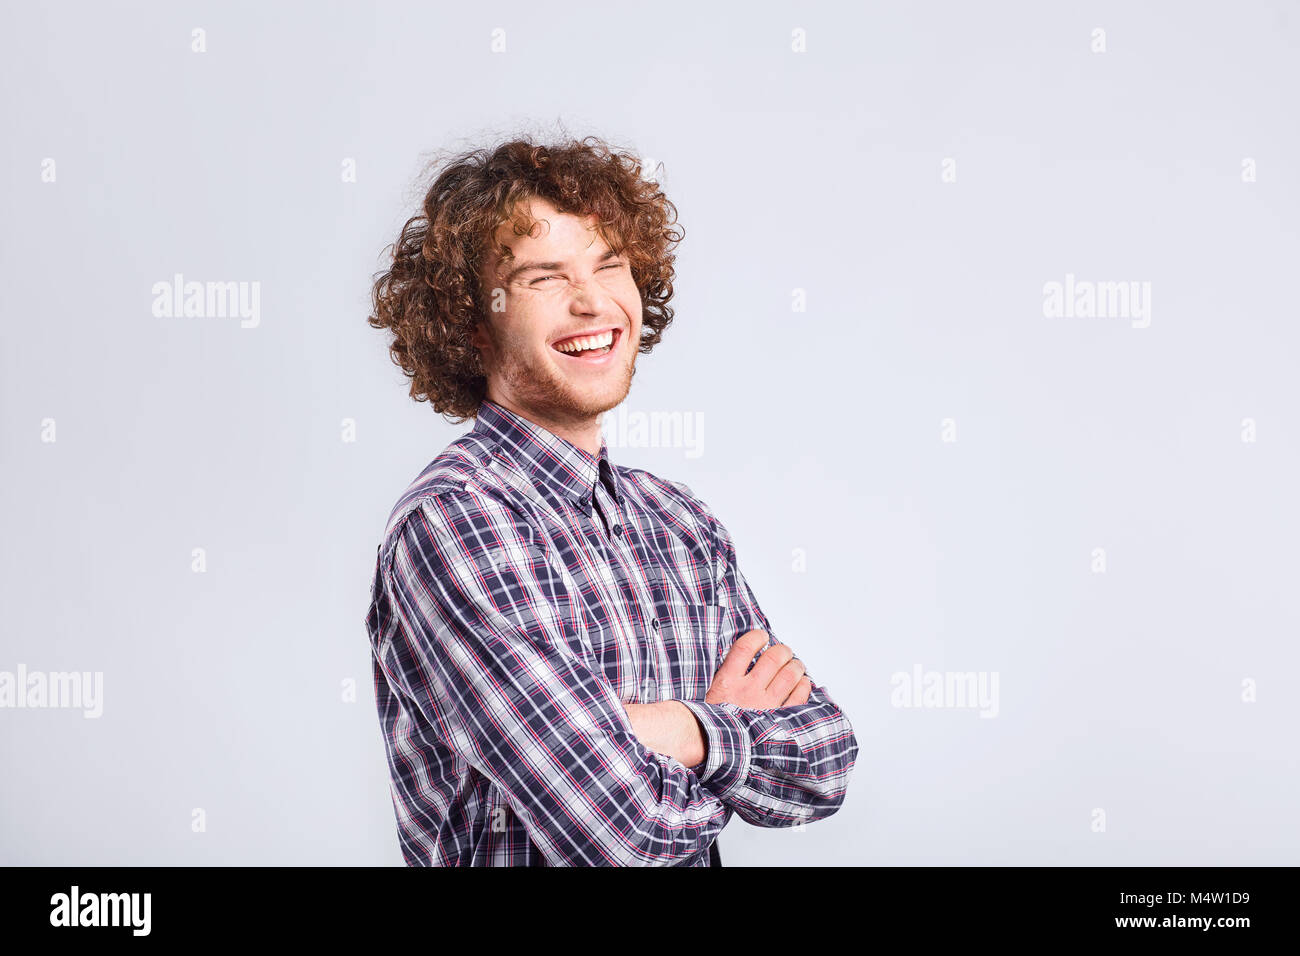 Curly guy smiles with a positive emotion. Stock Photo